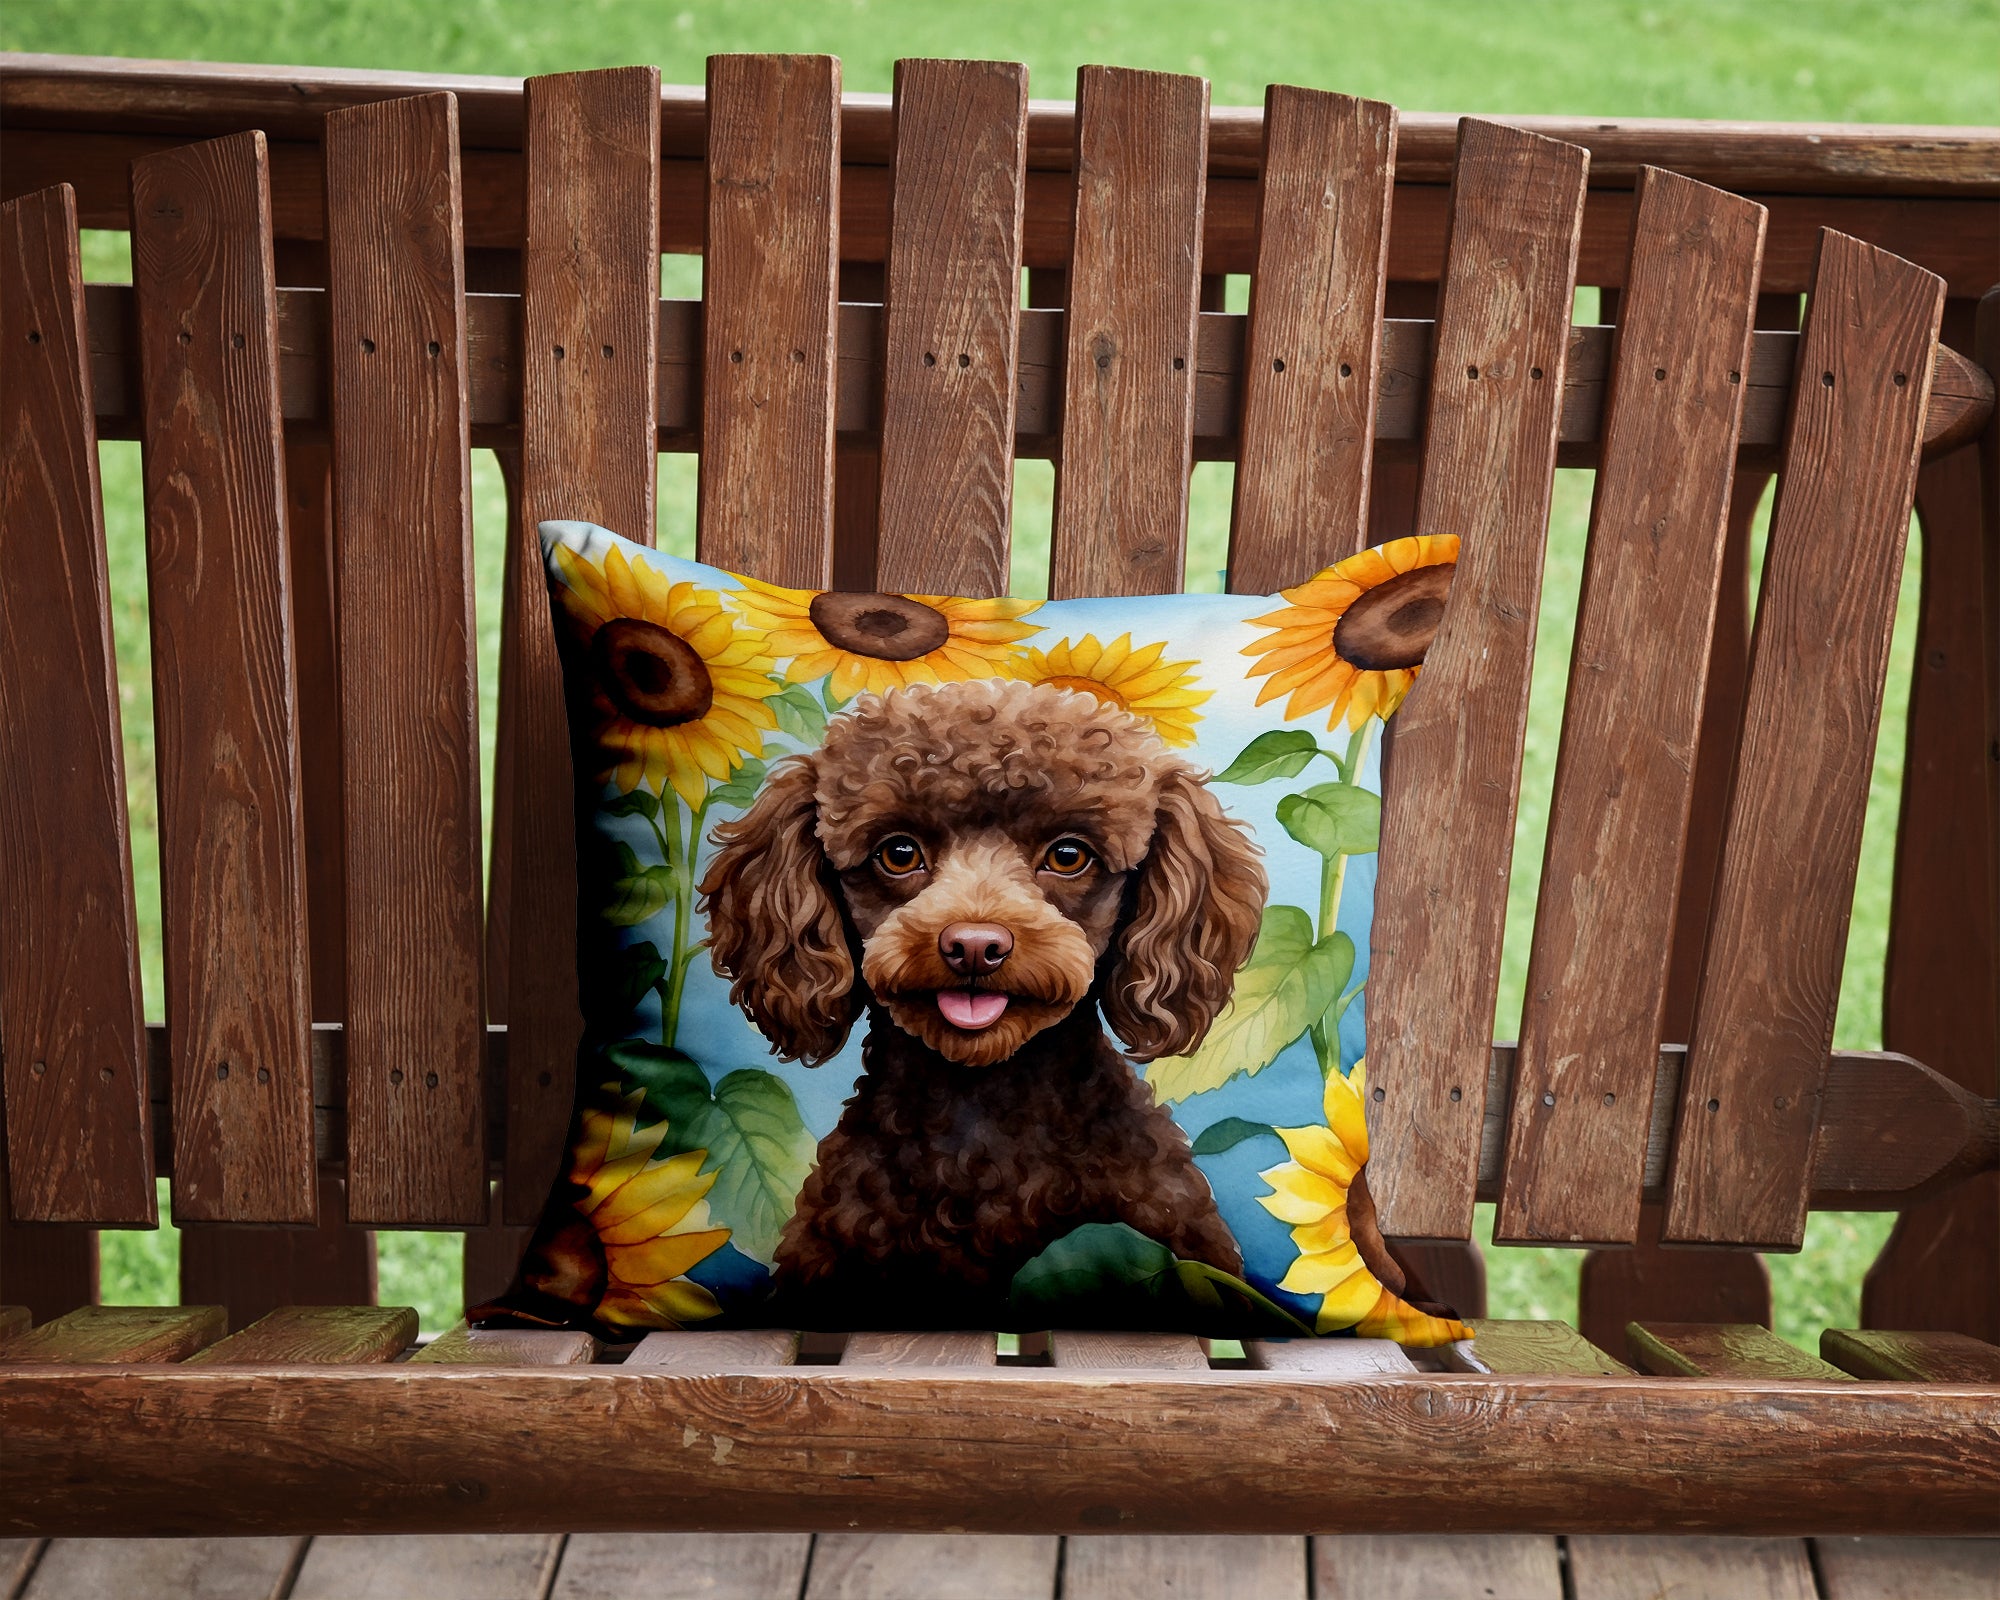 Chocolate Poodle in Sunflowers Throw Pillow